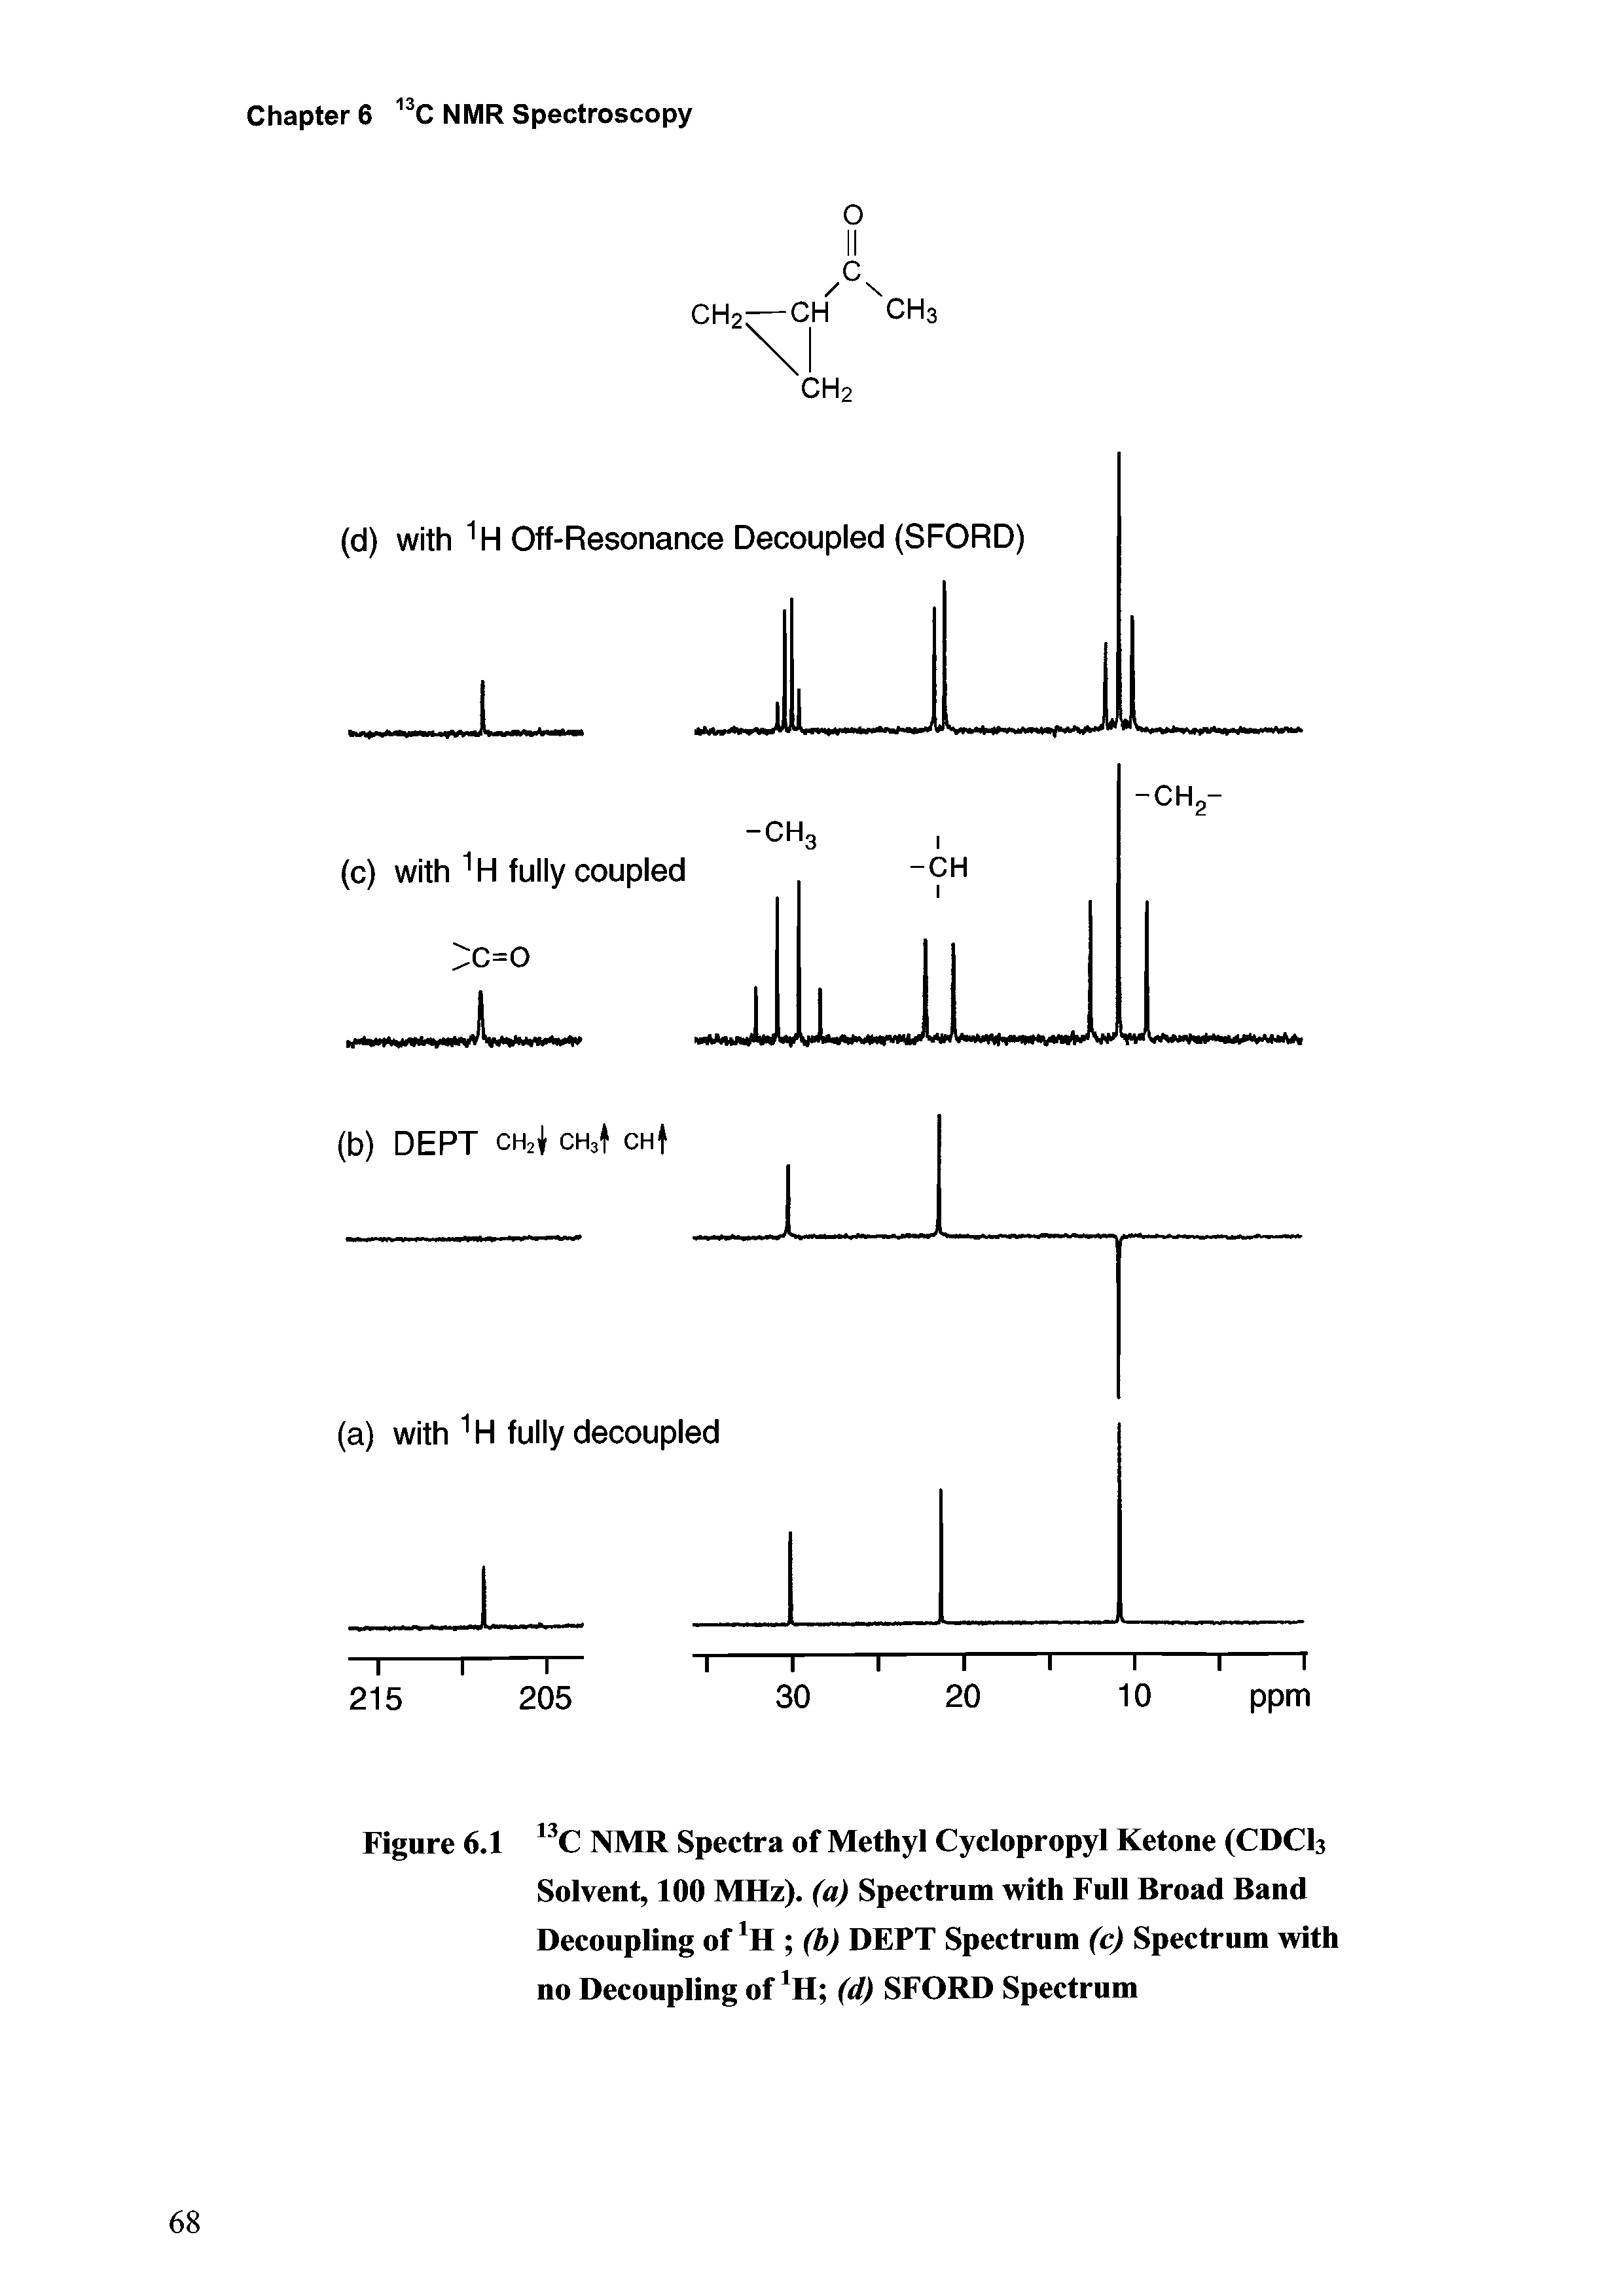 Figure 6.1 NMR Spectra of Methyl Cyclopropyl Ketone (CDCI3 Solvent, 100 MHz), (a) Spectrum with Full Broad Band Decoupling of (b) DEPT Spectrum (c) Spectrum with no Decoupling of H (d) SFORD Spectrum...